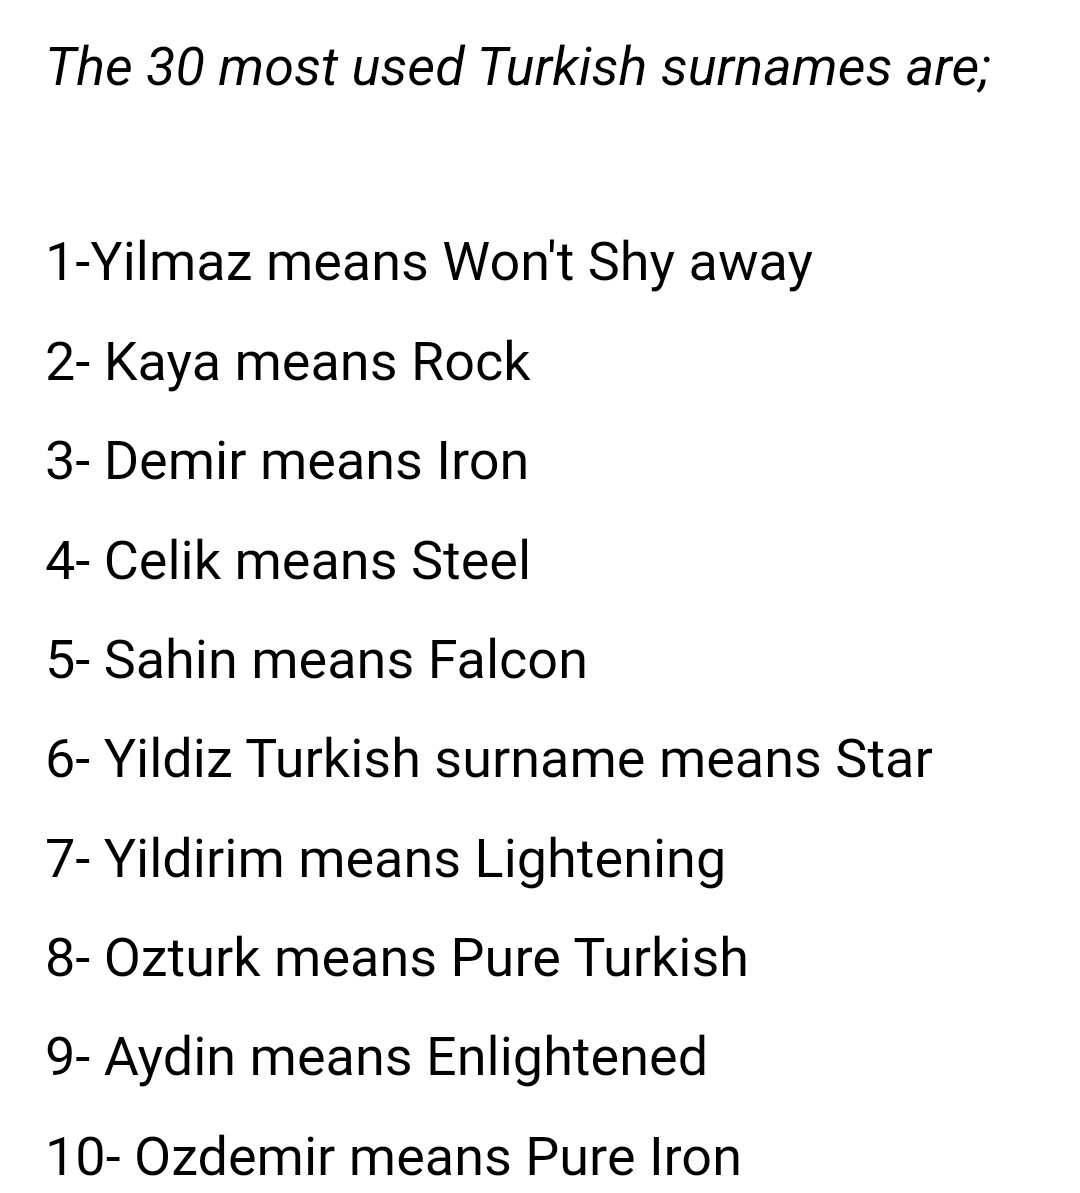 Turkish last names are so funny. Instead of being a historical byproduct (thus mostly being occupational or paternal names like Miller or Johnson), they were created de novo in the 20s and people got to choose their own names, which is why the most popular names are all so heavy